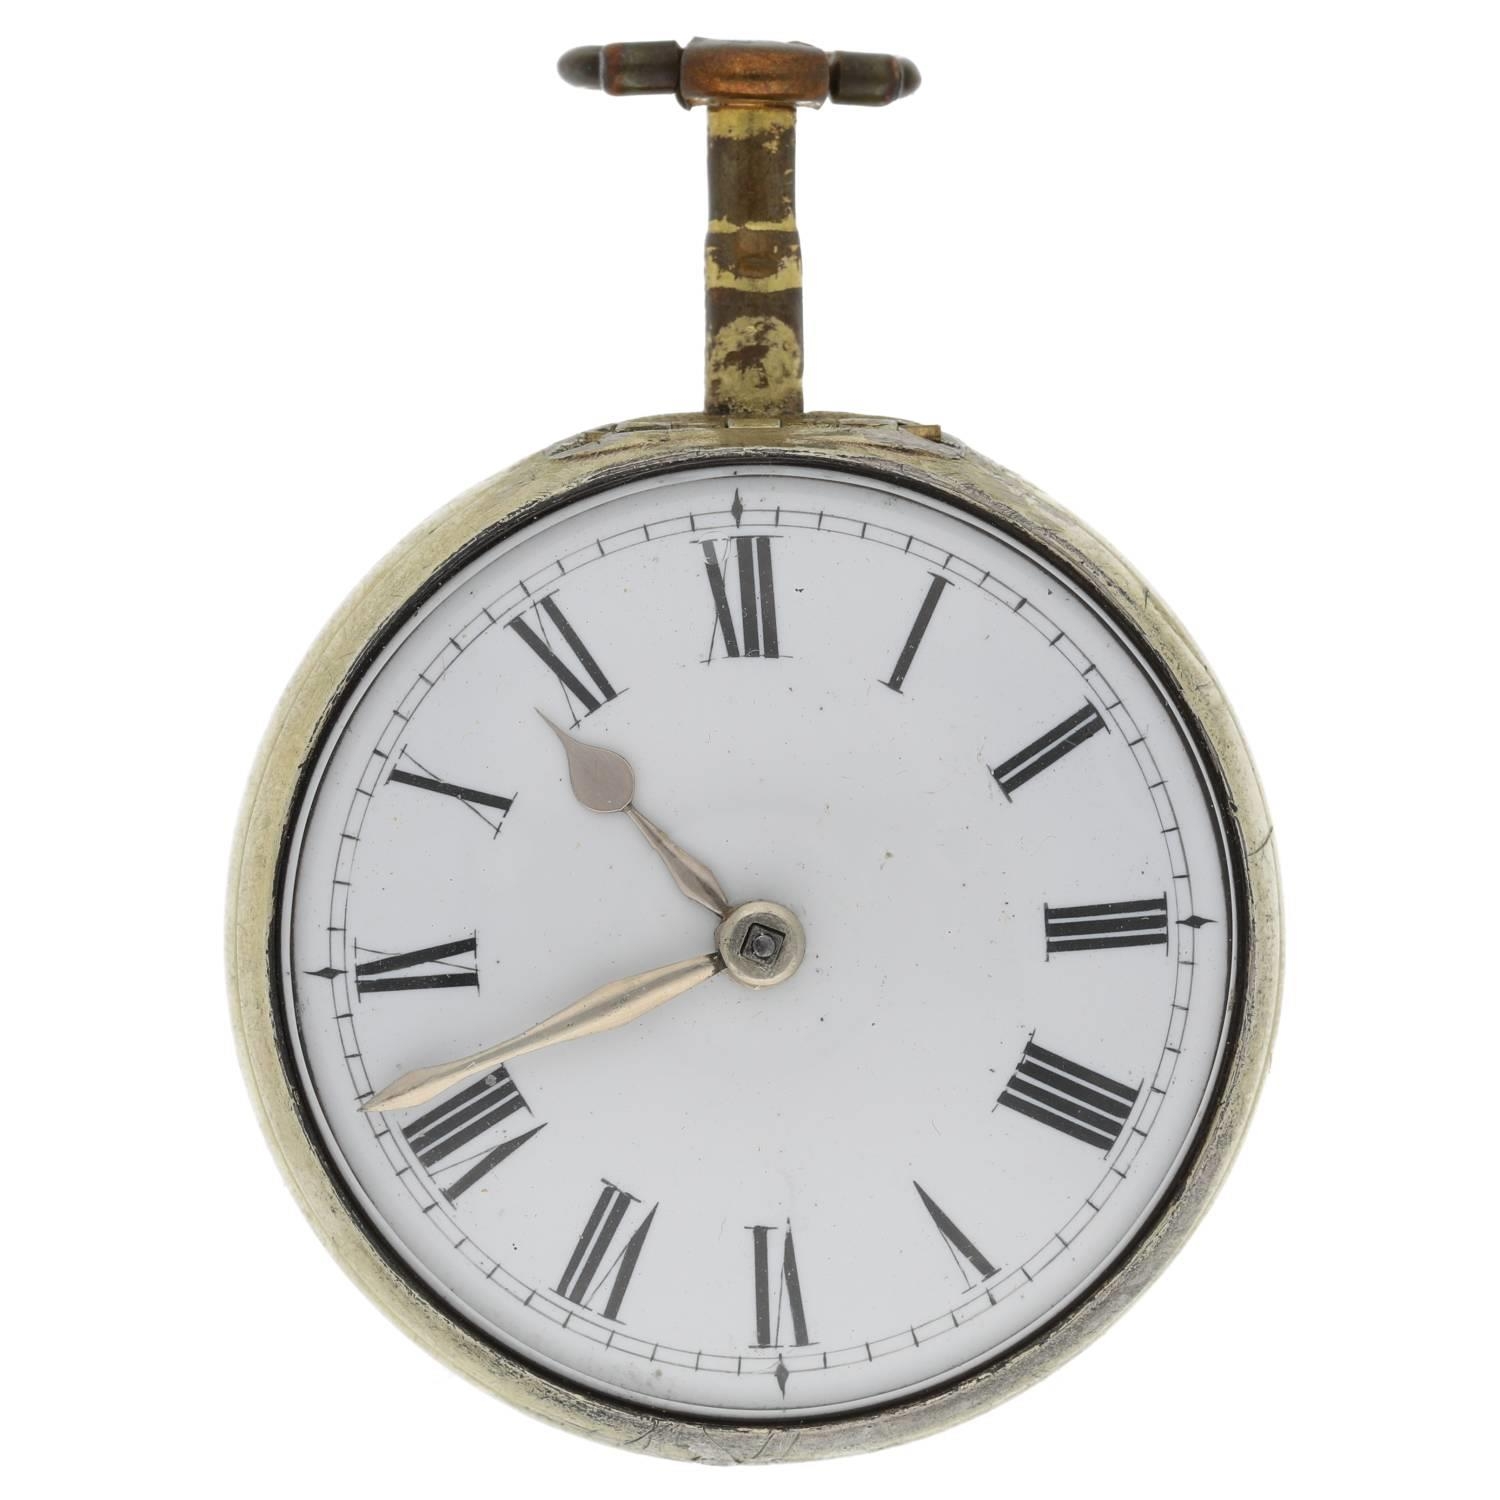 Henry King, London - 18th century English gilt pair cased verge pocket watch, signed fusee movement, - Image 3 of 10